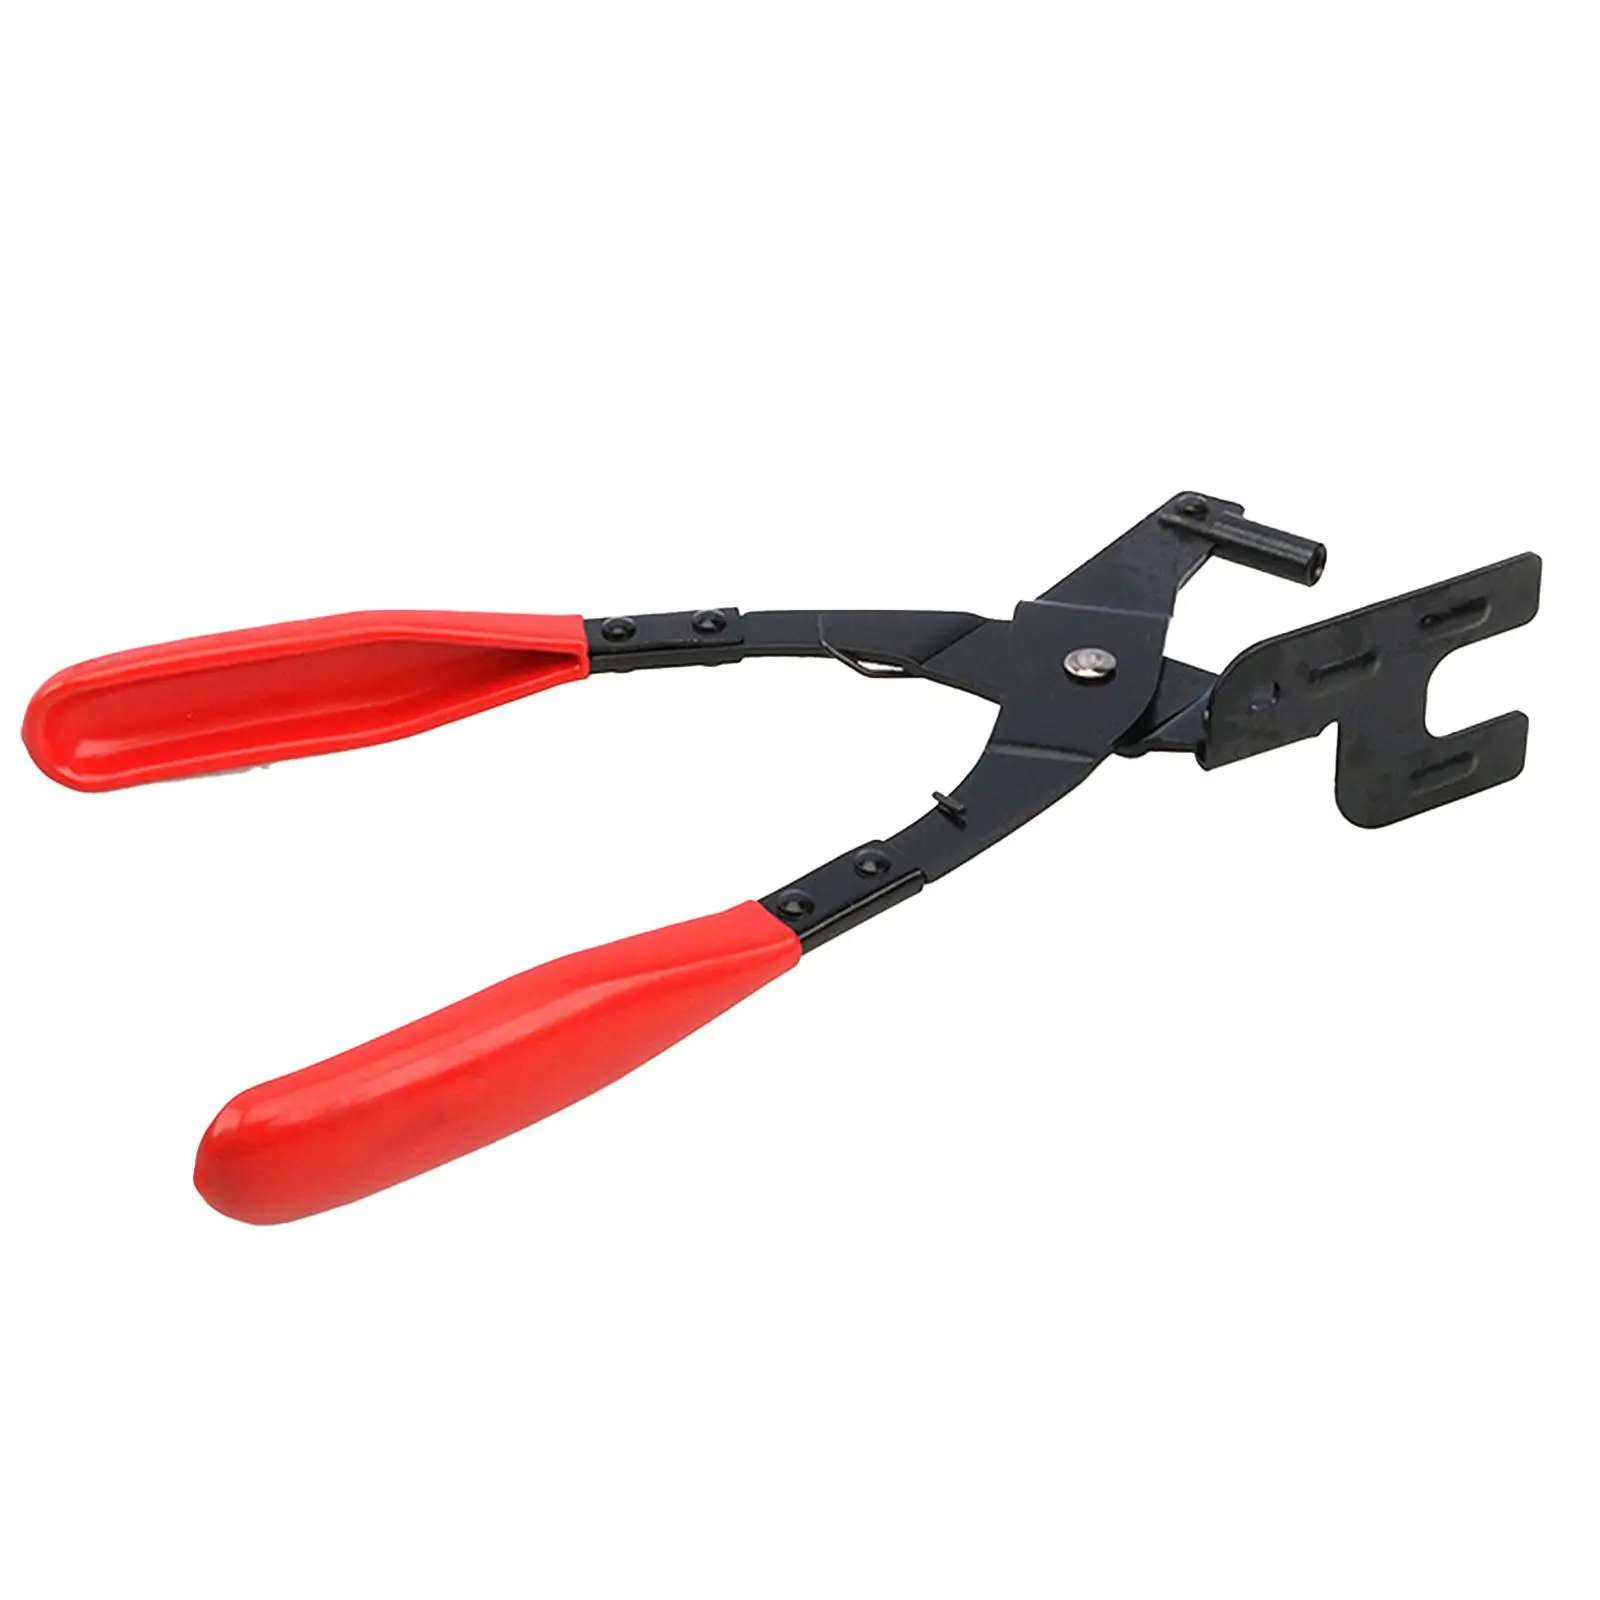 Exhaust Hanger Removal Pliers Non Slip Hand Operated Tools Heavy Duty Exhaust Hanger Removal Tool Red for Tailpipes, Mufflers